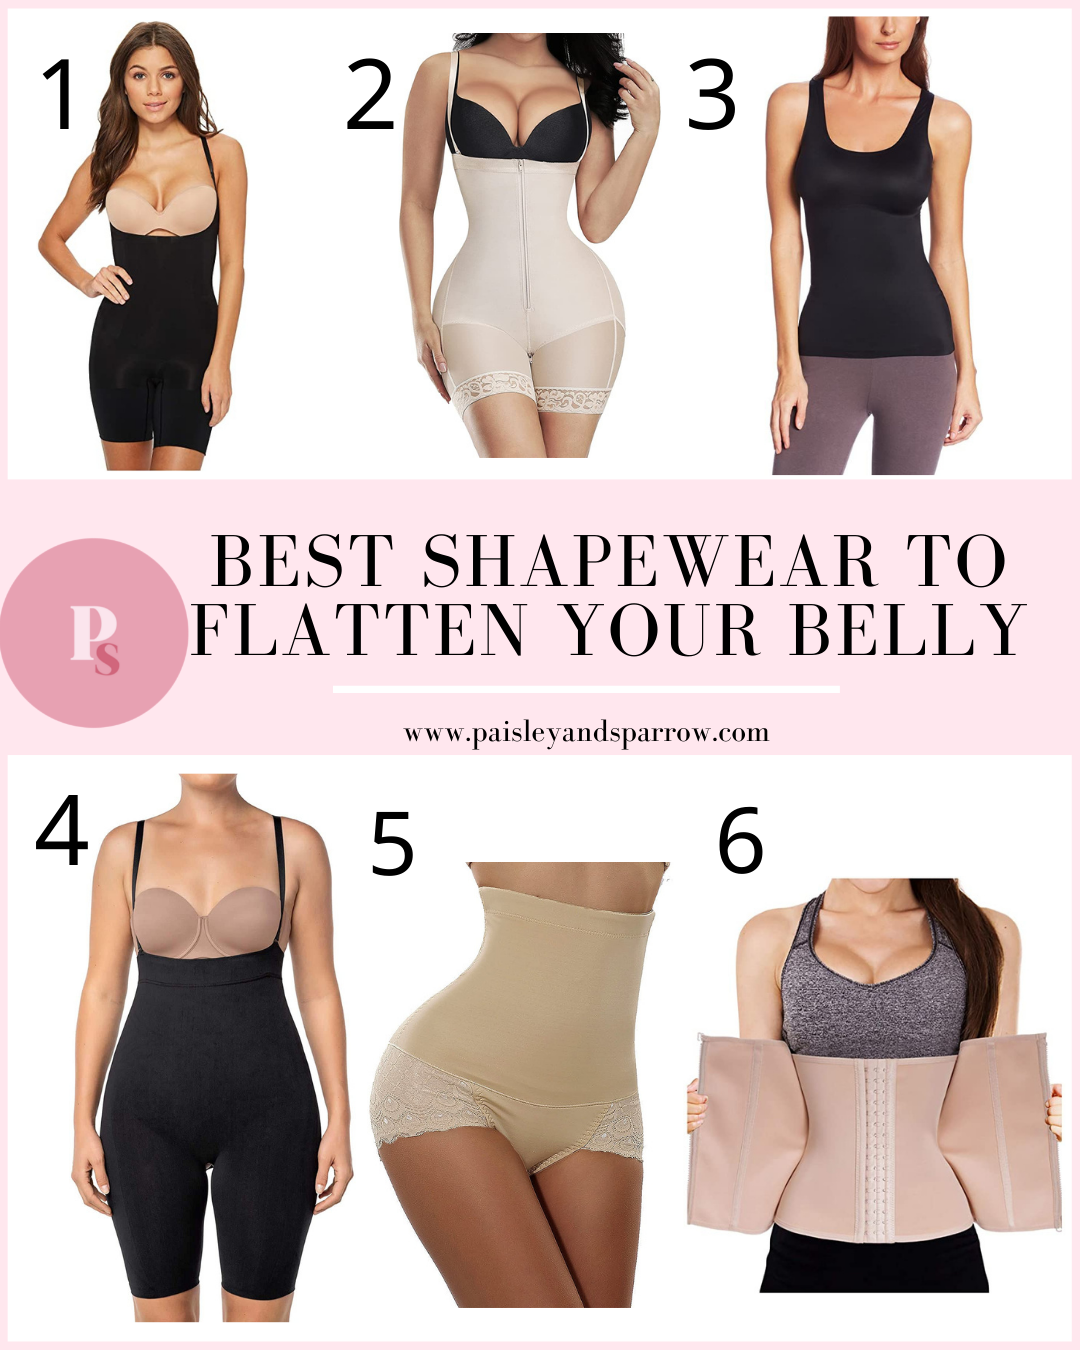 item baseball disguise 6 Best Shapewear for Lower Belly Pooch - Paisley & Sparrow